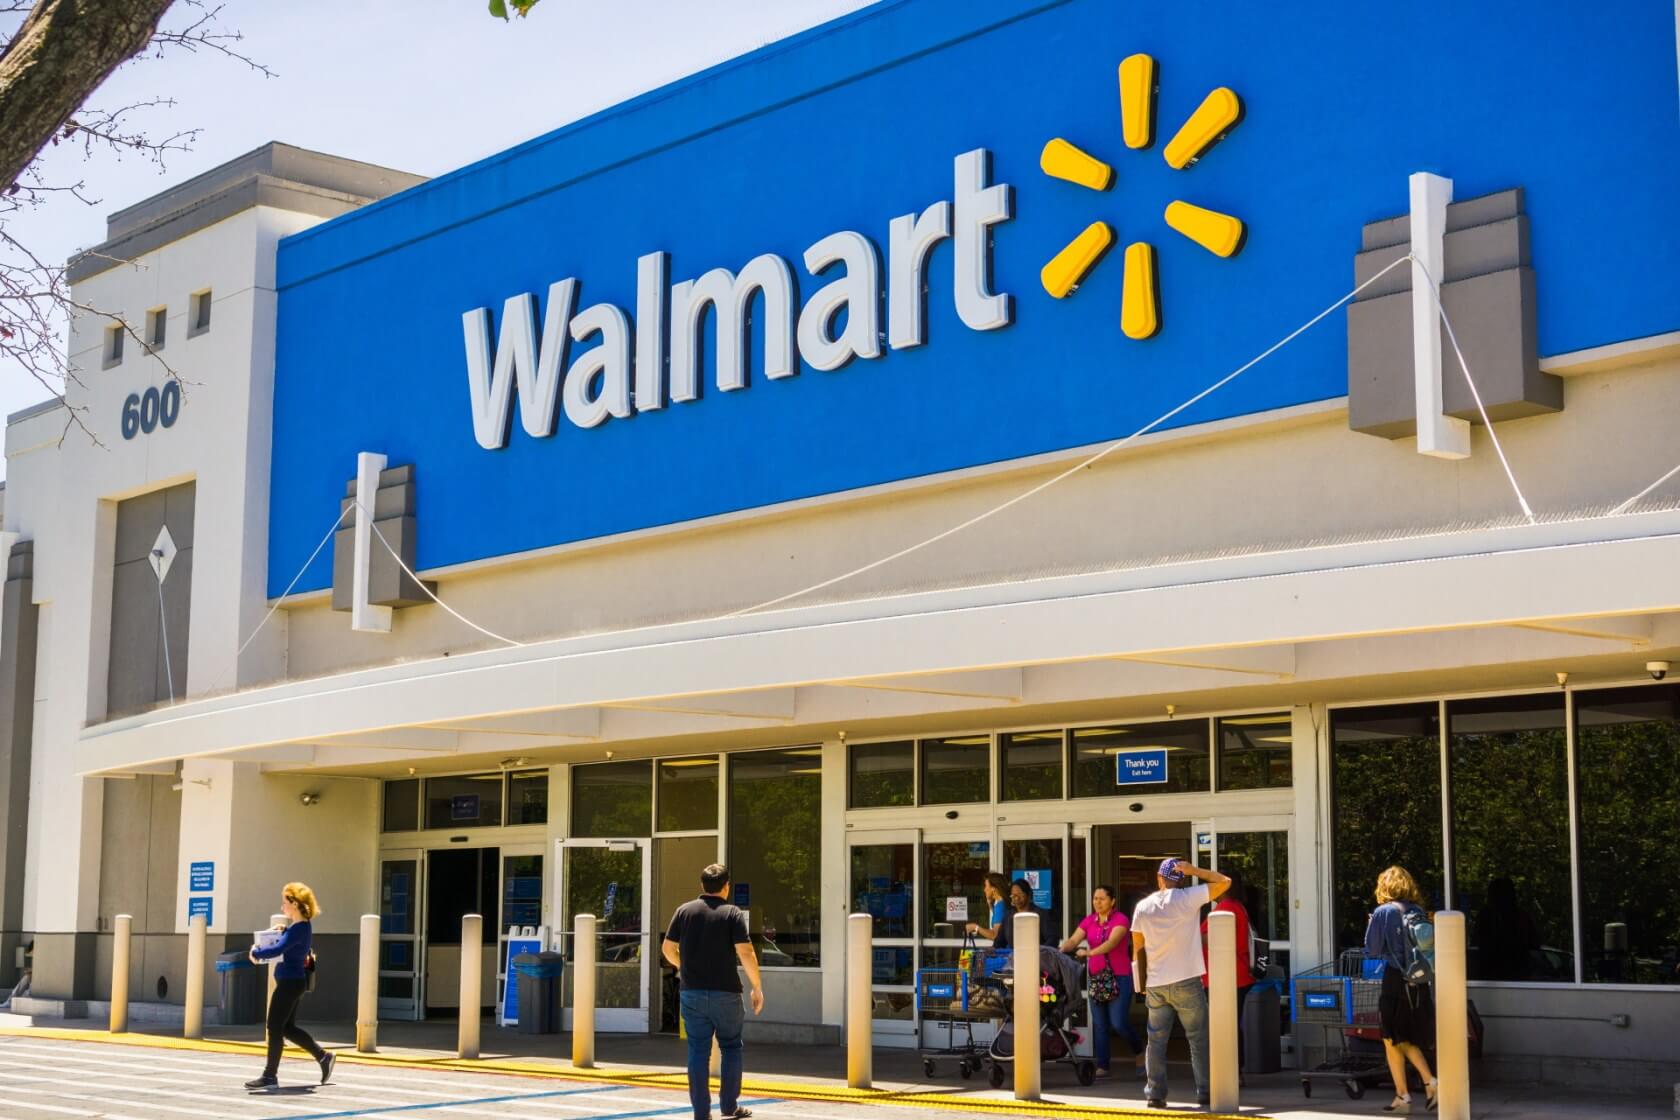 Walmart and Tesla have reached a settlement regarding rooftop solar panel fires